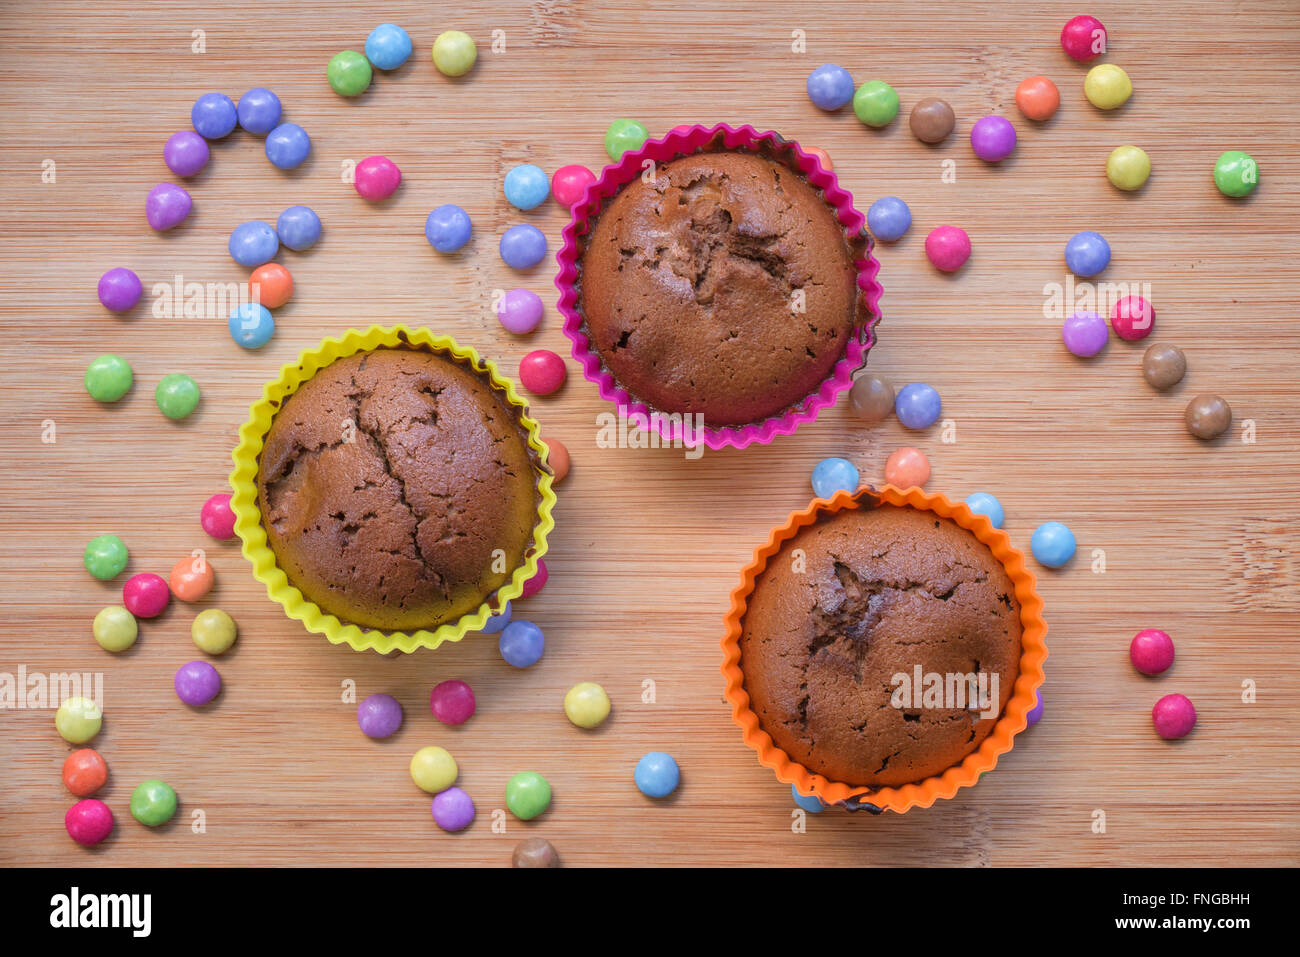 Colorful chocolate cupcakes with sweets Stock Photo